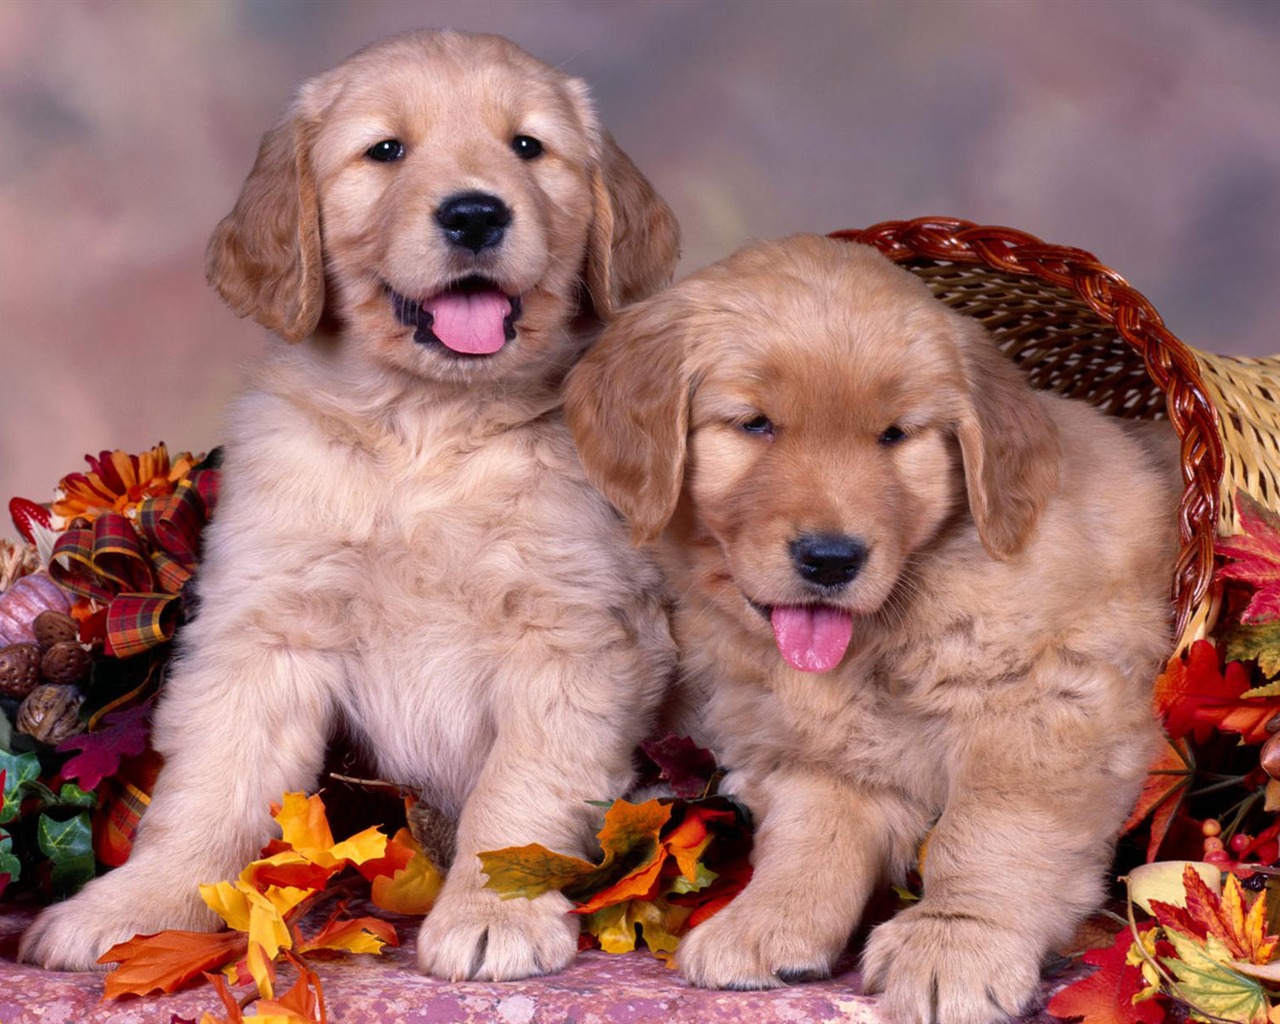 Puppy Photo HD wallpapers (2) #12 - 1280x1024